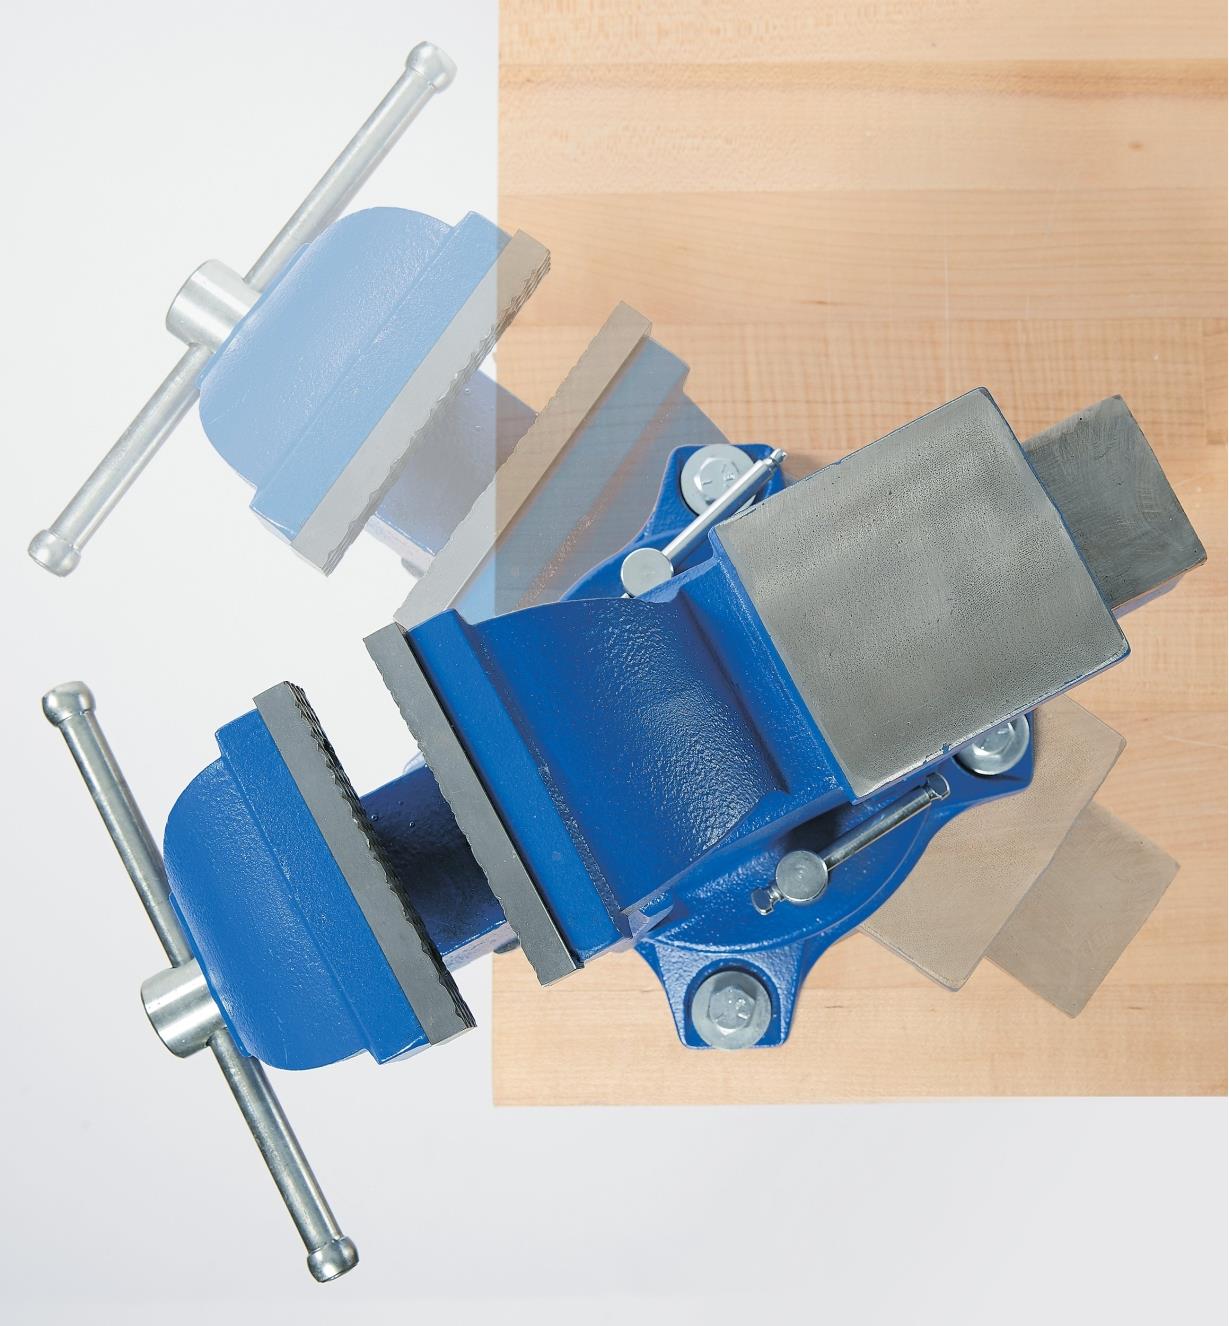 Top view of heavy-duty vise with ghosted image showing swivel action